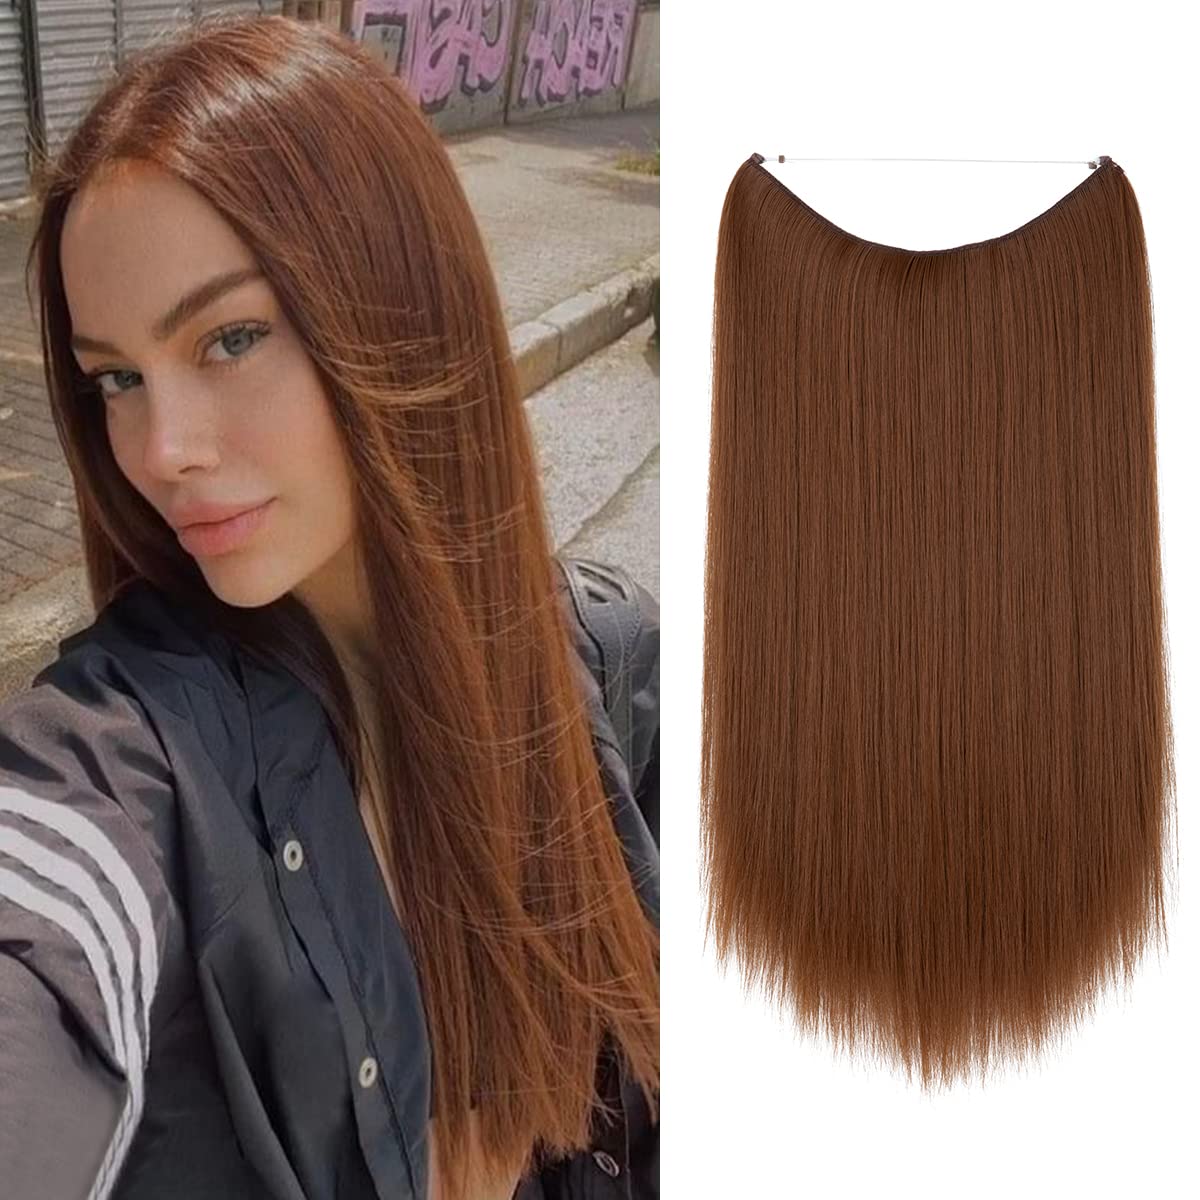 Clip In Long Straight Synthetic Hair Extension